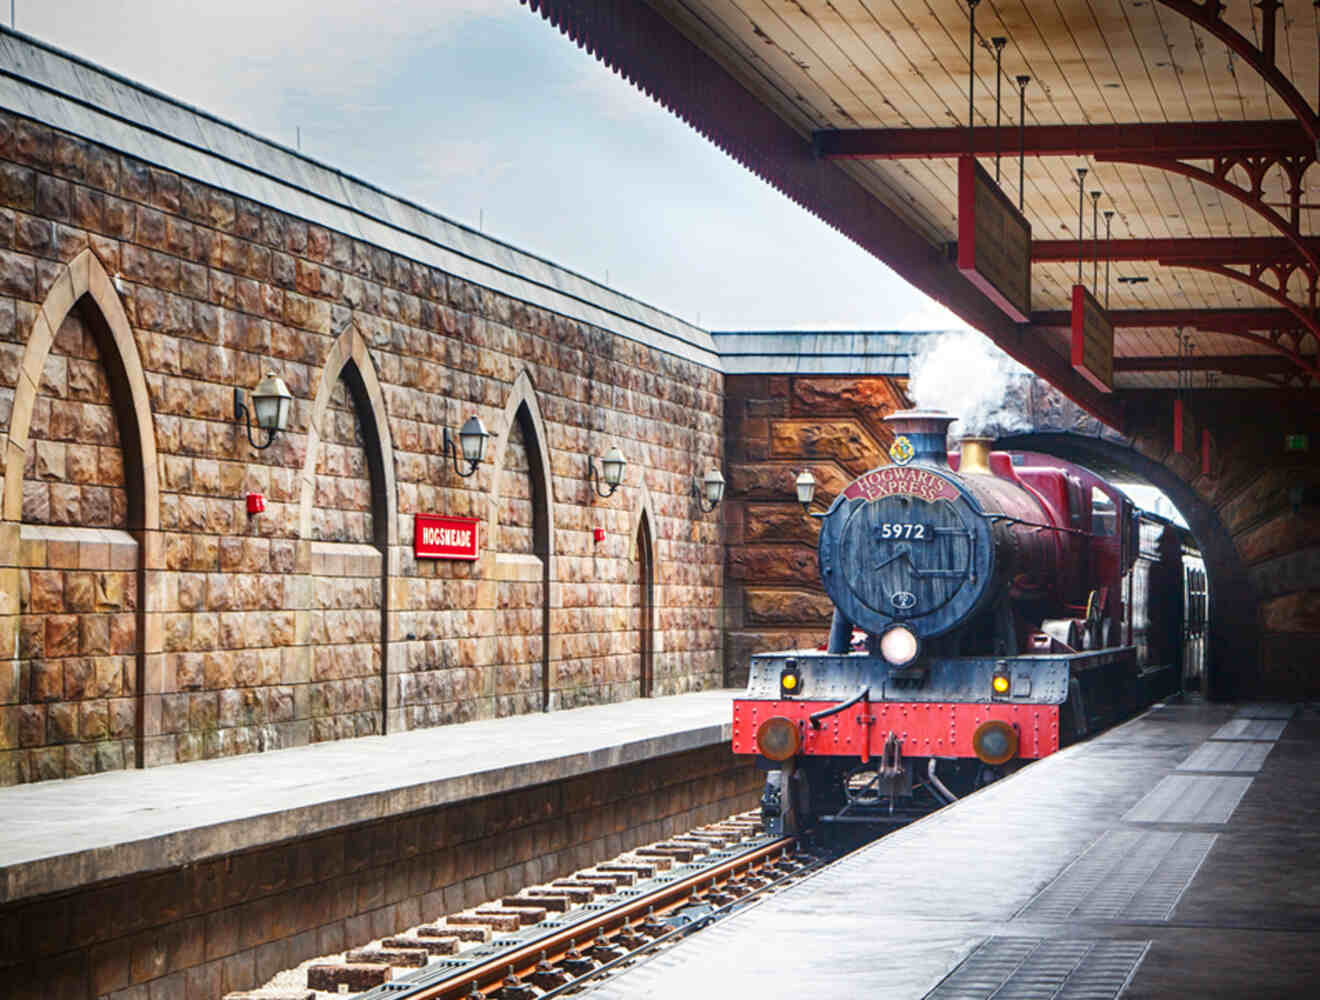 View of the Hogwarts Express train at the station